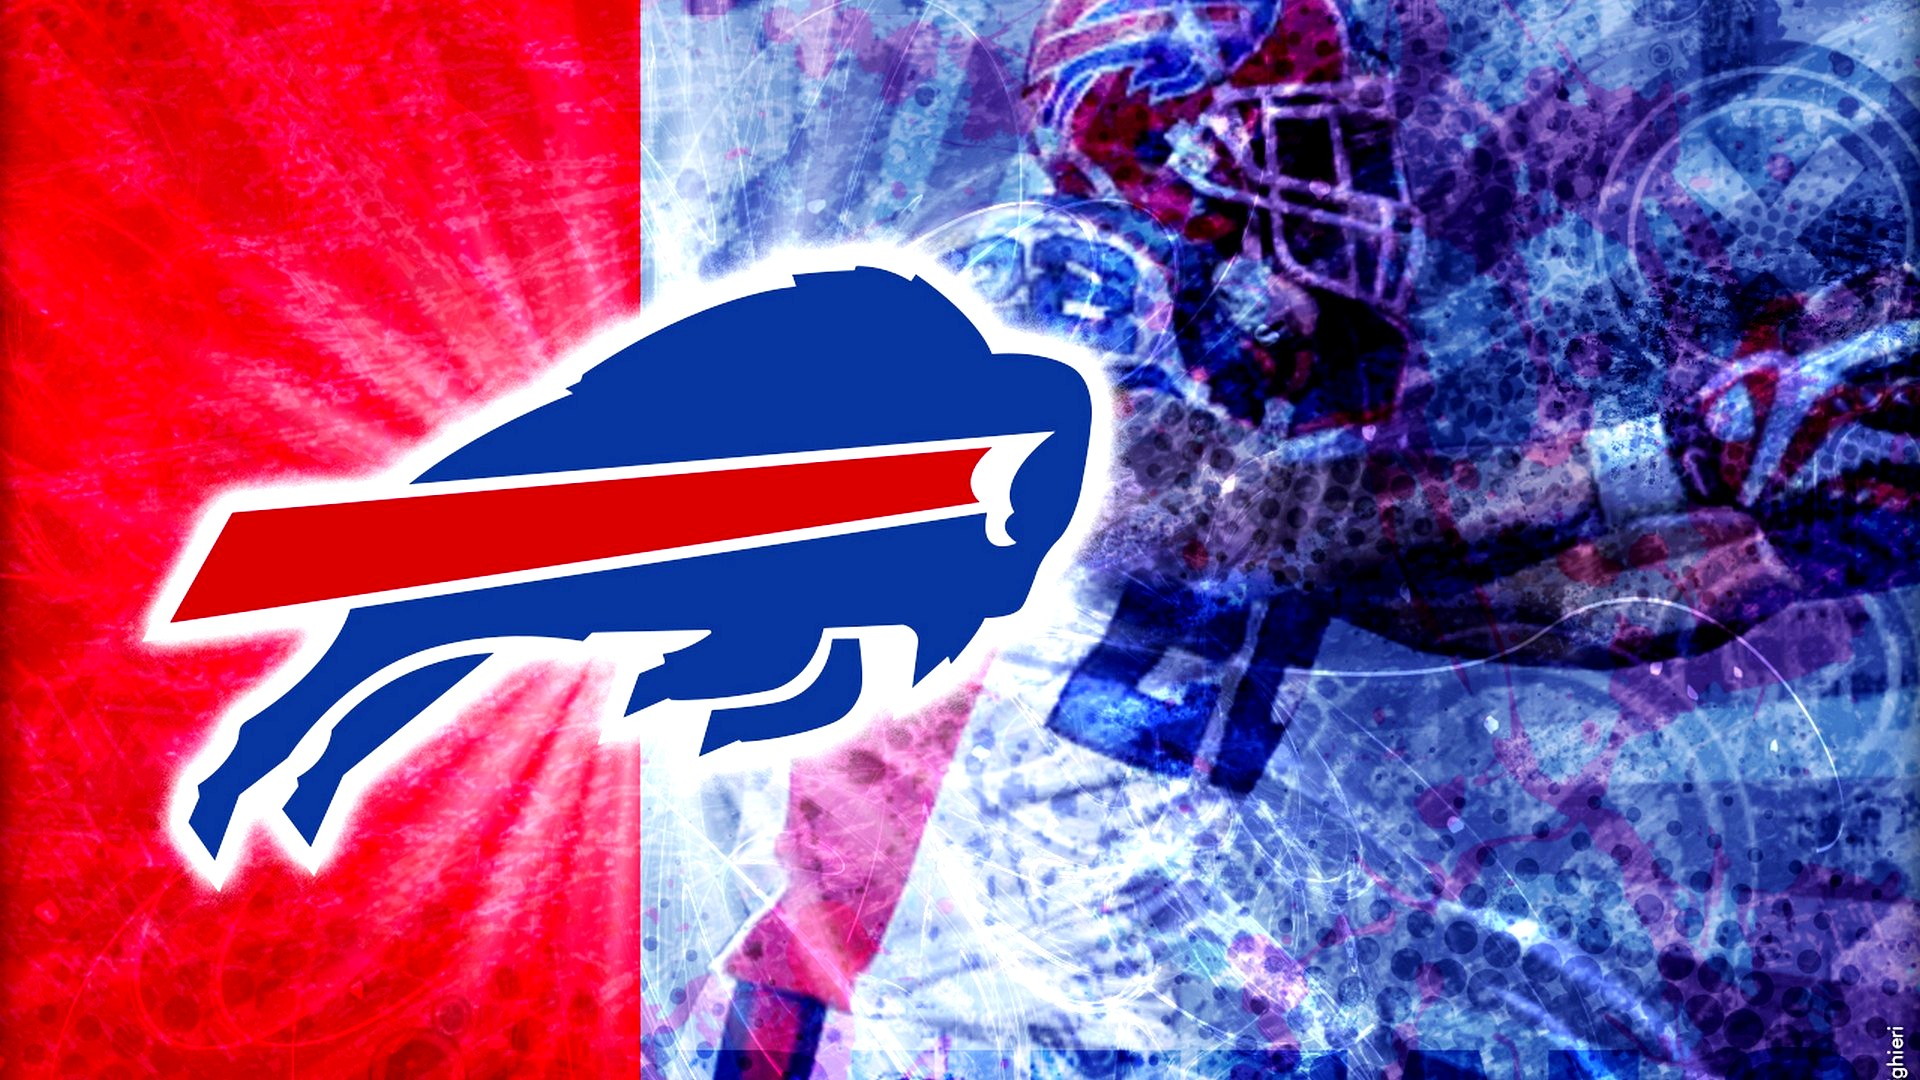 Buffalo Bills Macbook Backgrounds With high-resolution 1920X1080 pixel. You can use and set as wallpaper for Notebook Screensavers, Mac Wallpapers, Mobile Home Screen, iPhone or Android Phones Lock Screen